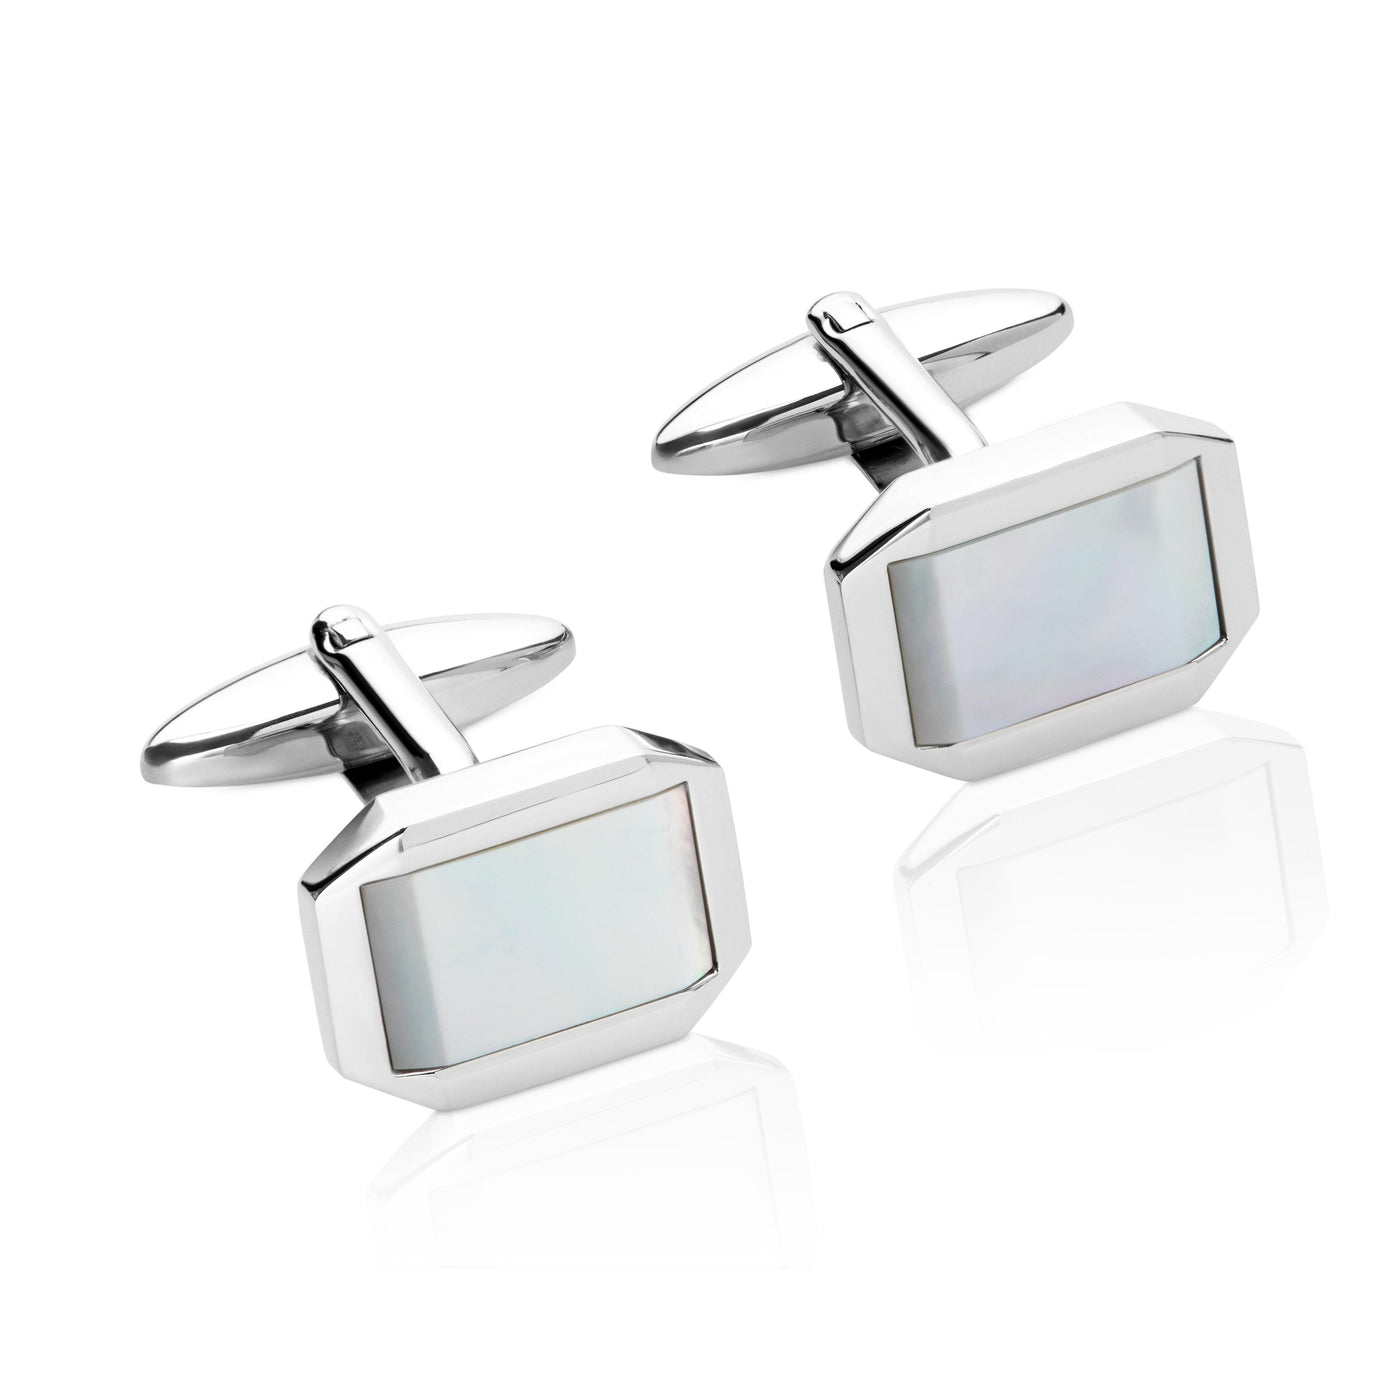 Unique & Co Cufflinks With Mother of Pearl Inlay - Rococo Jewellery